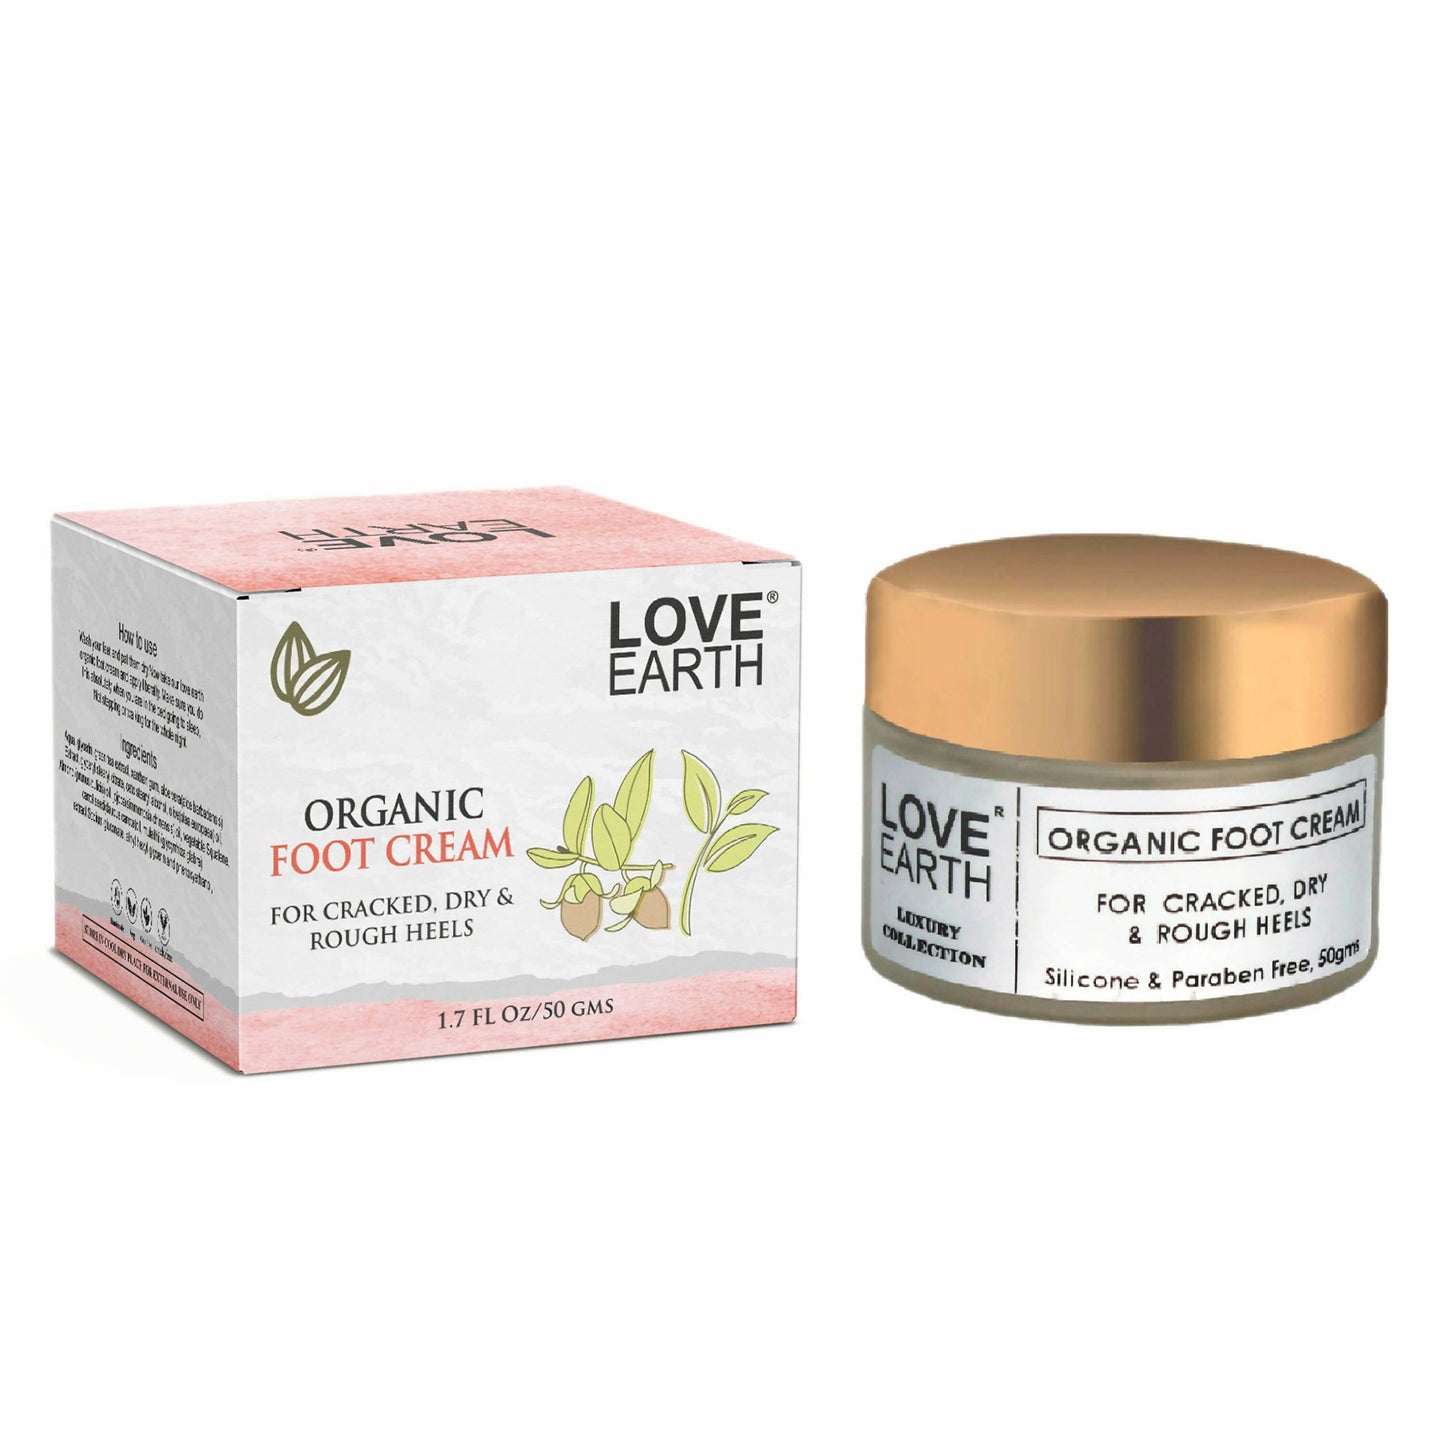 Love Earth Organic Foot Cream For Cracked & Dry Heels